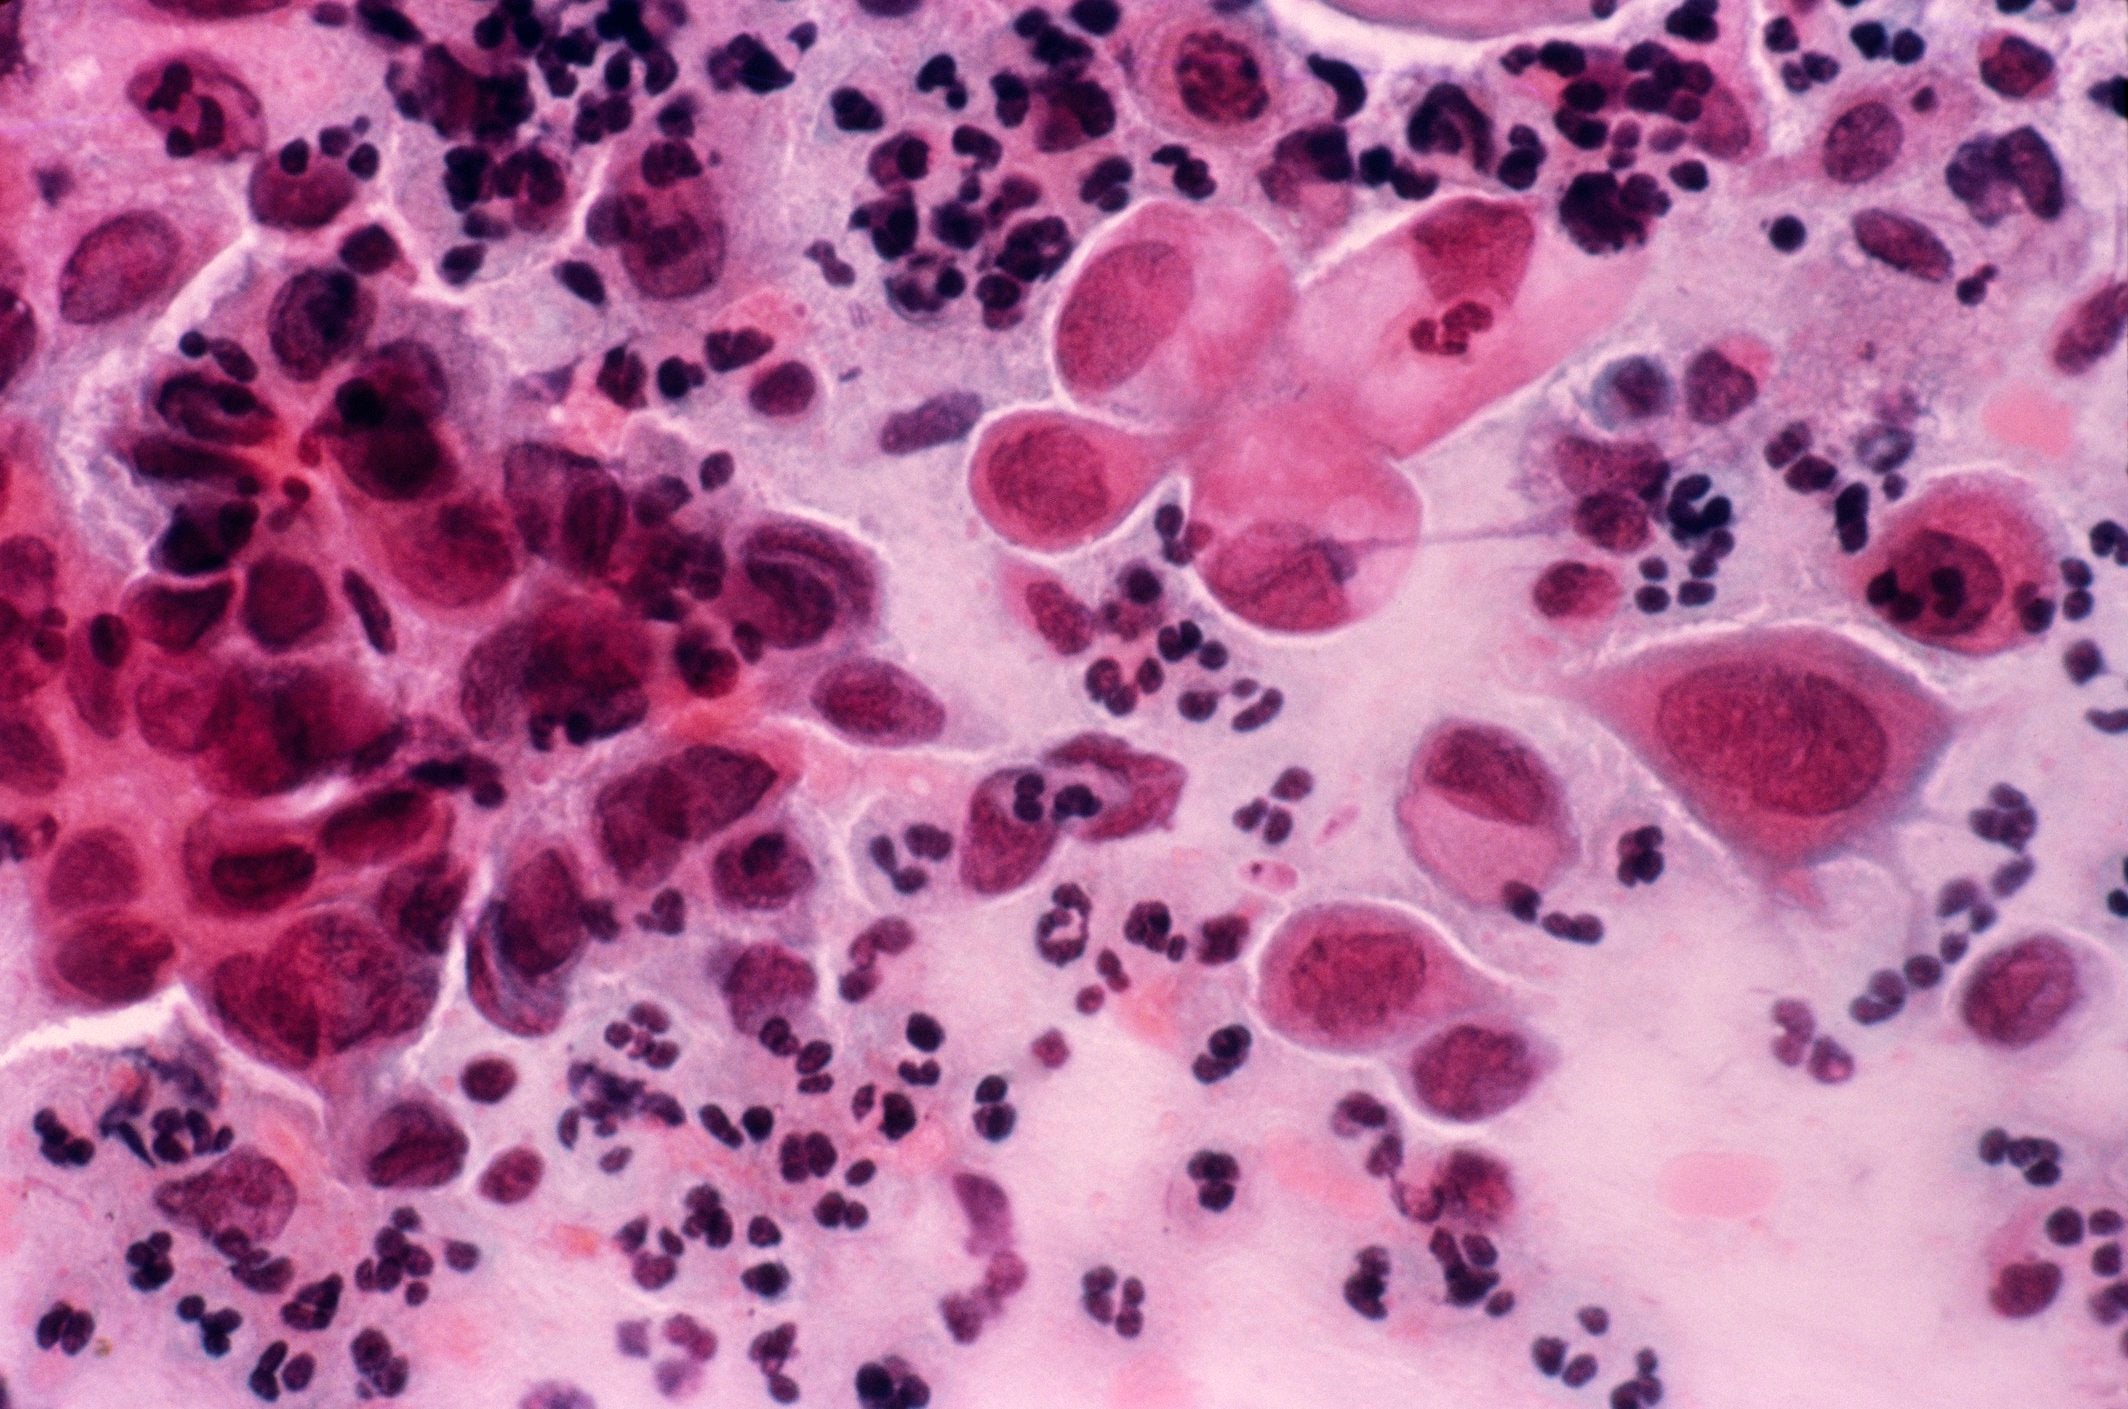 Cervical Cancer Deaths Rates Are Much Higher Than Previously Thought, Study Says
